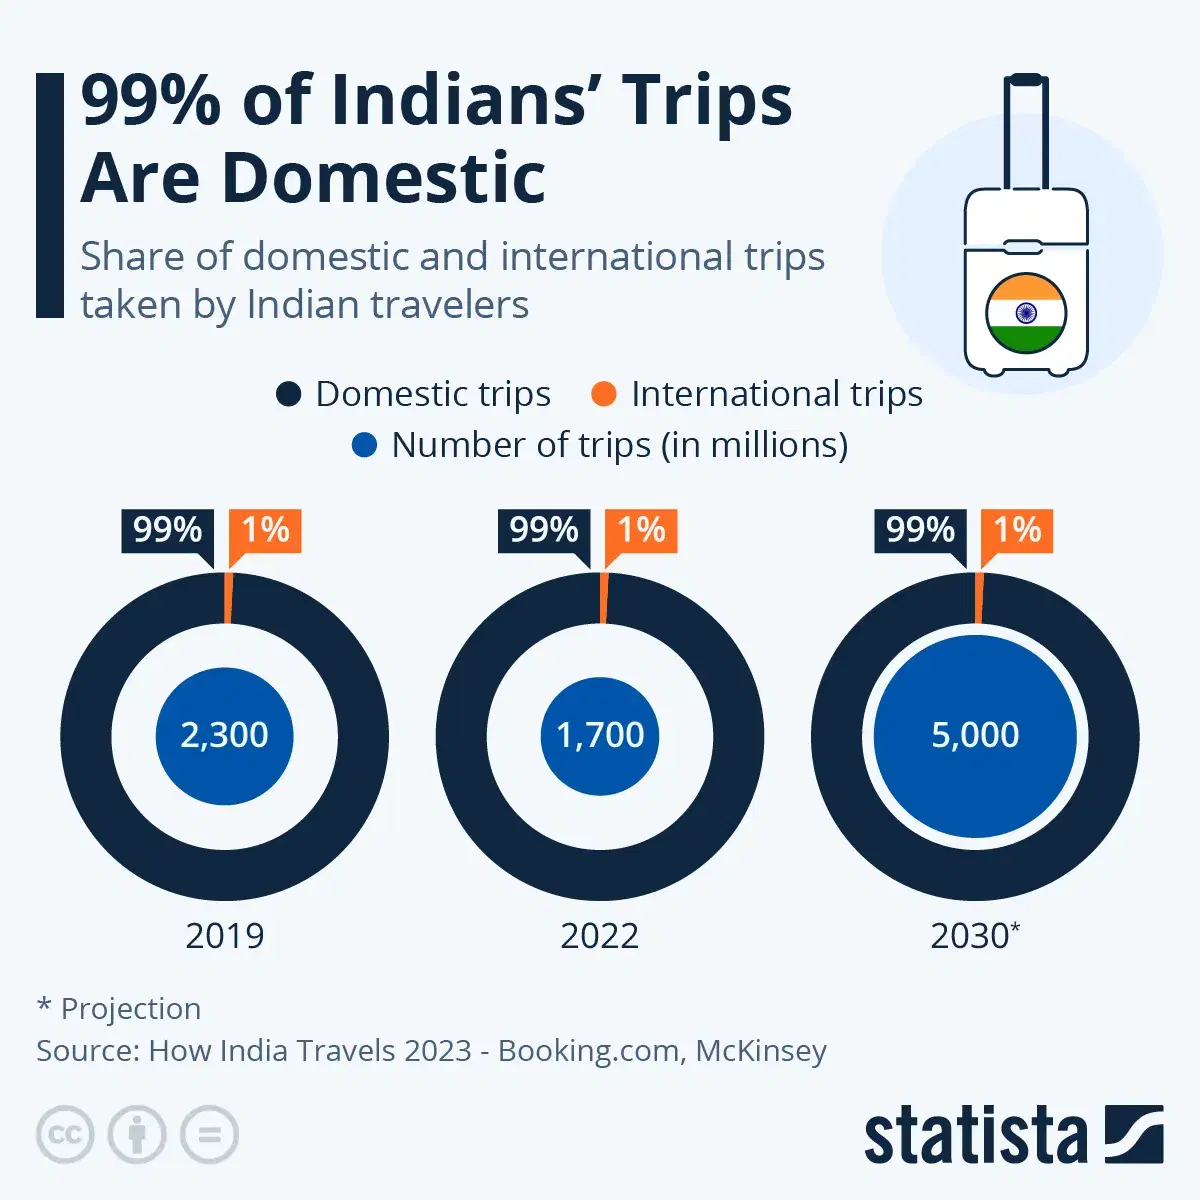 99% of Indians' Trips Are Domestic